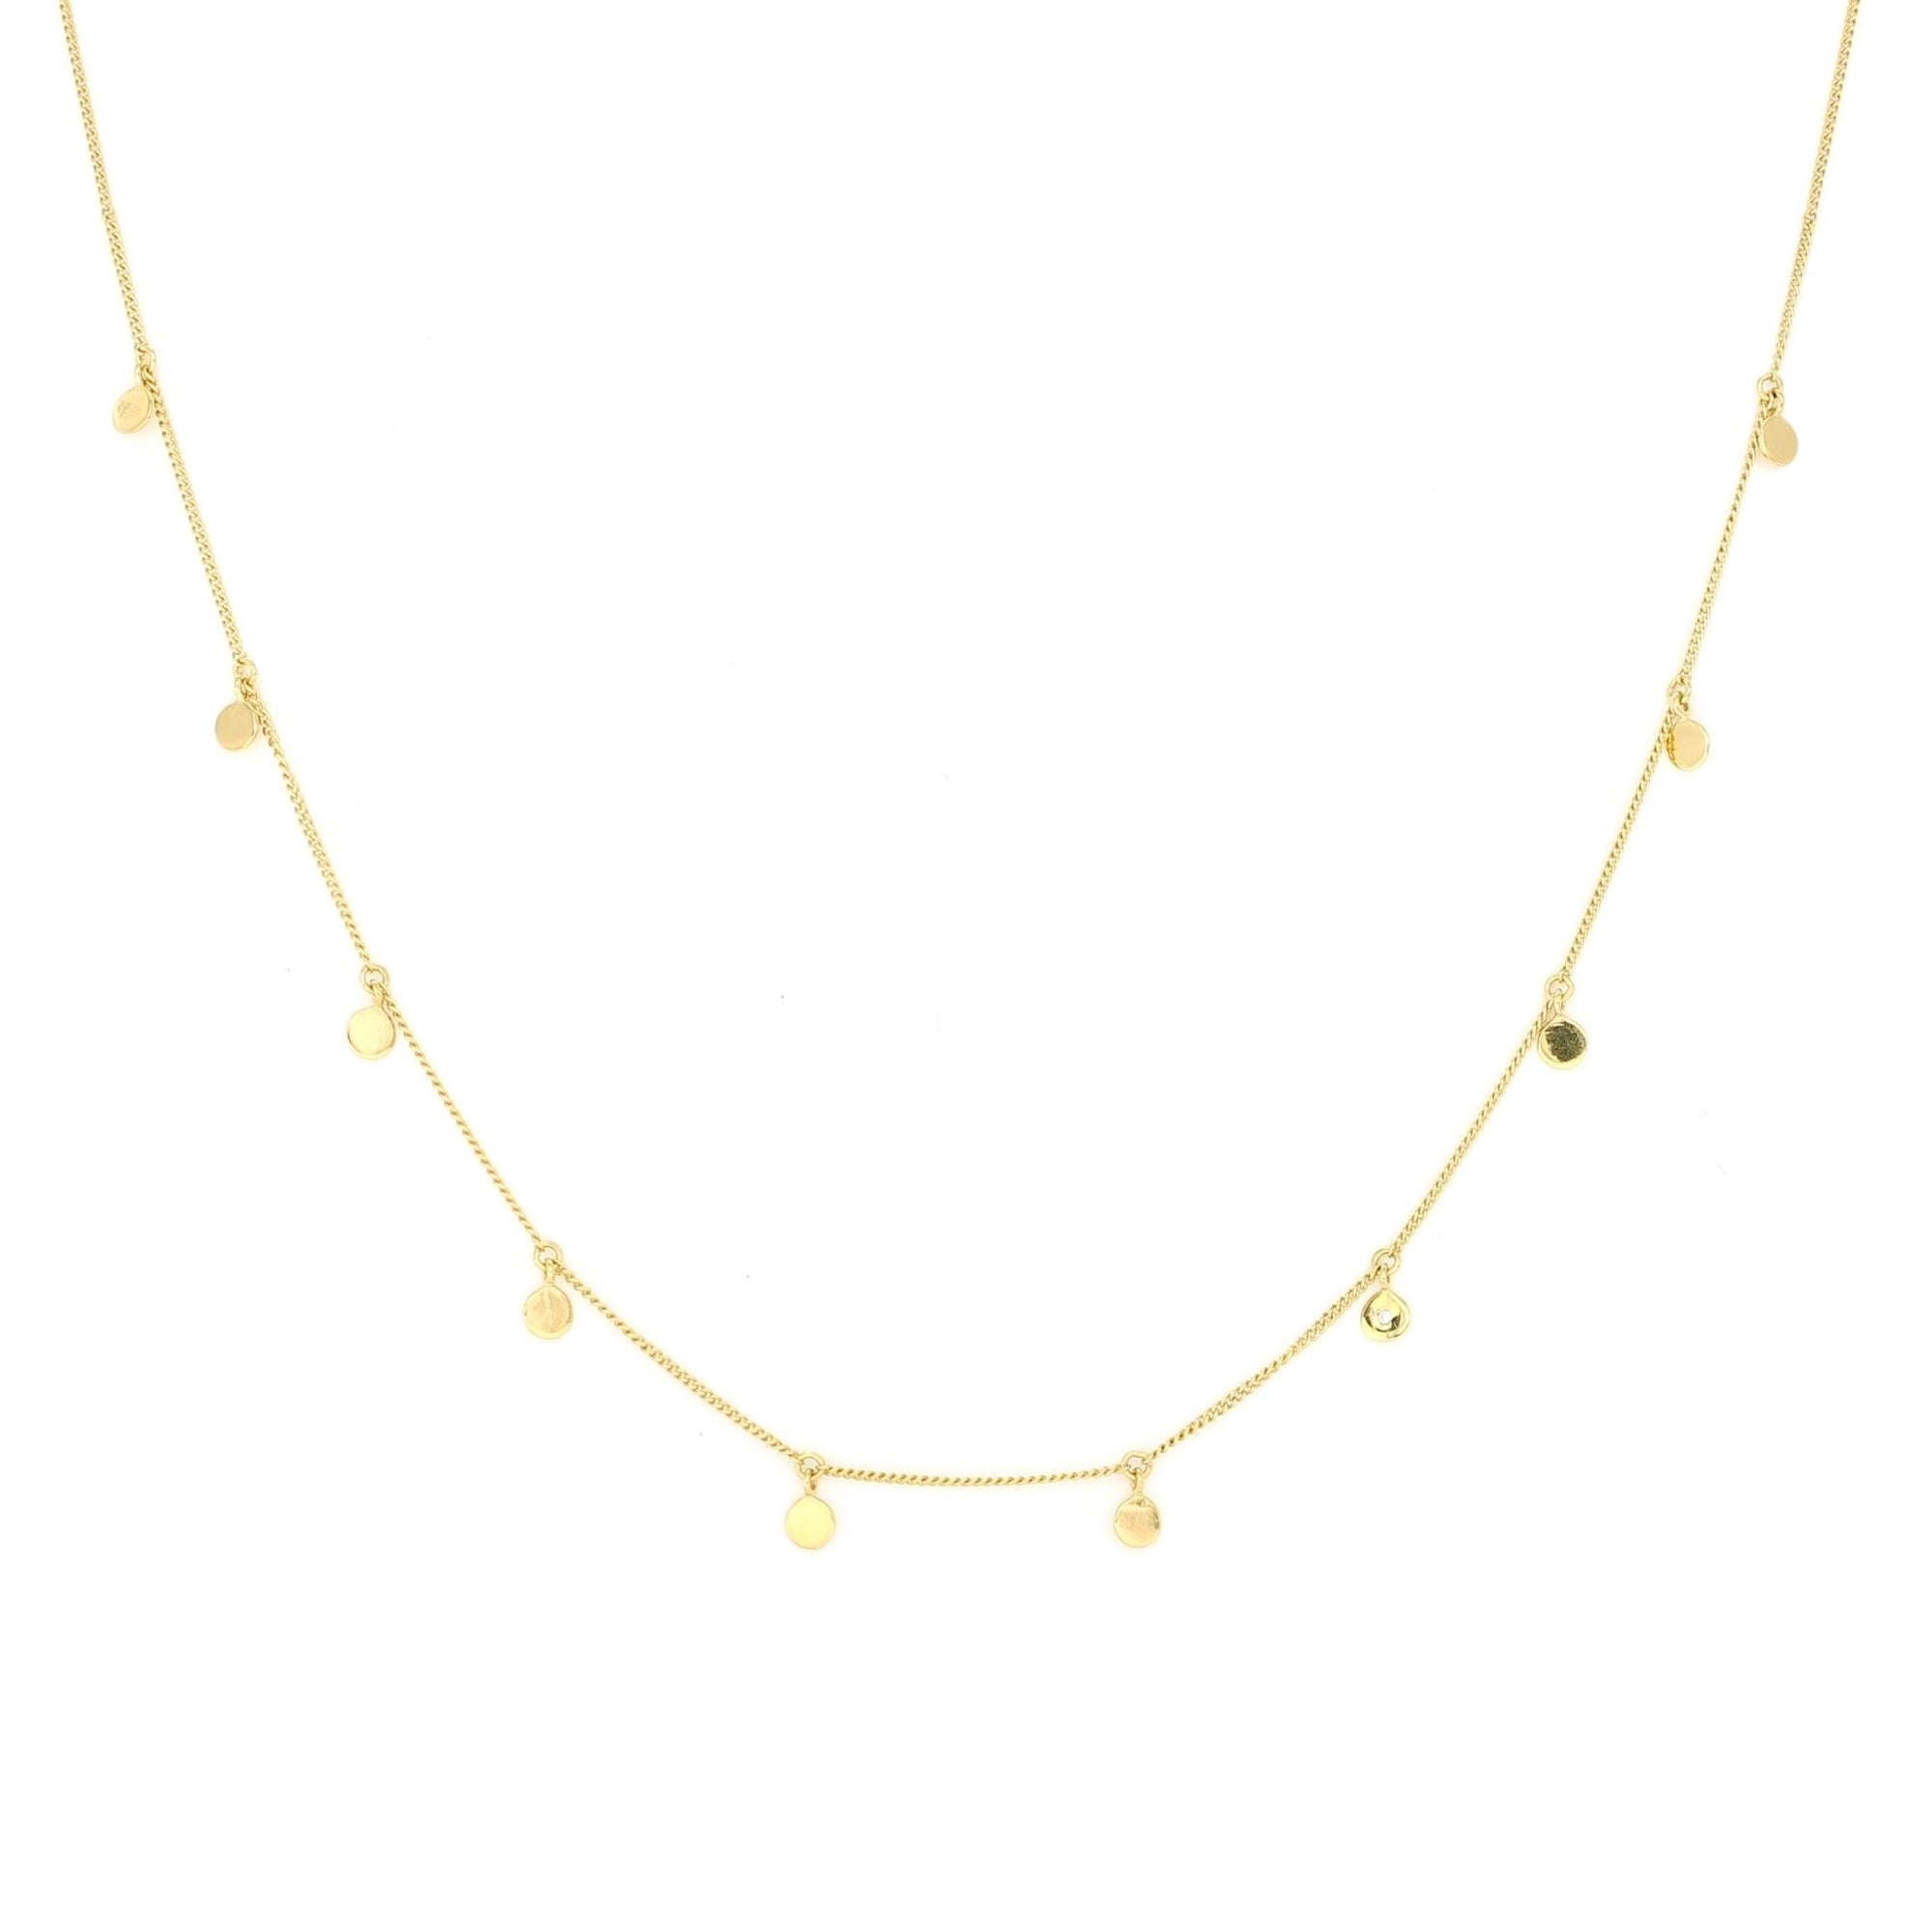 DAINTY POISE DISK NECKLACE - CUBIC ZIRCONIA & GOLD - SO PRETTY CARA COTTER